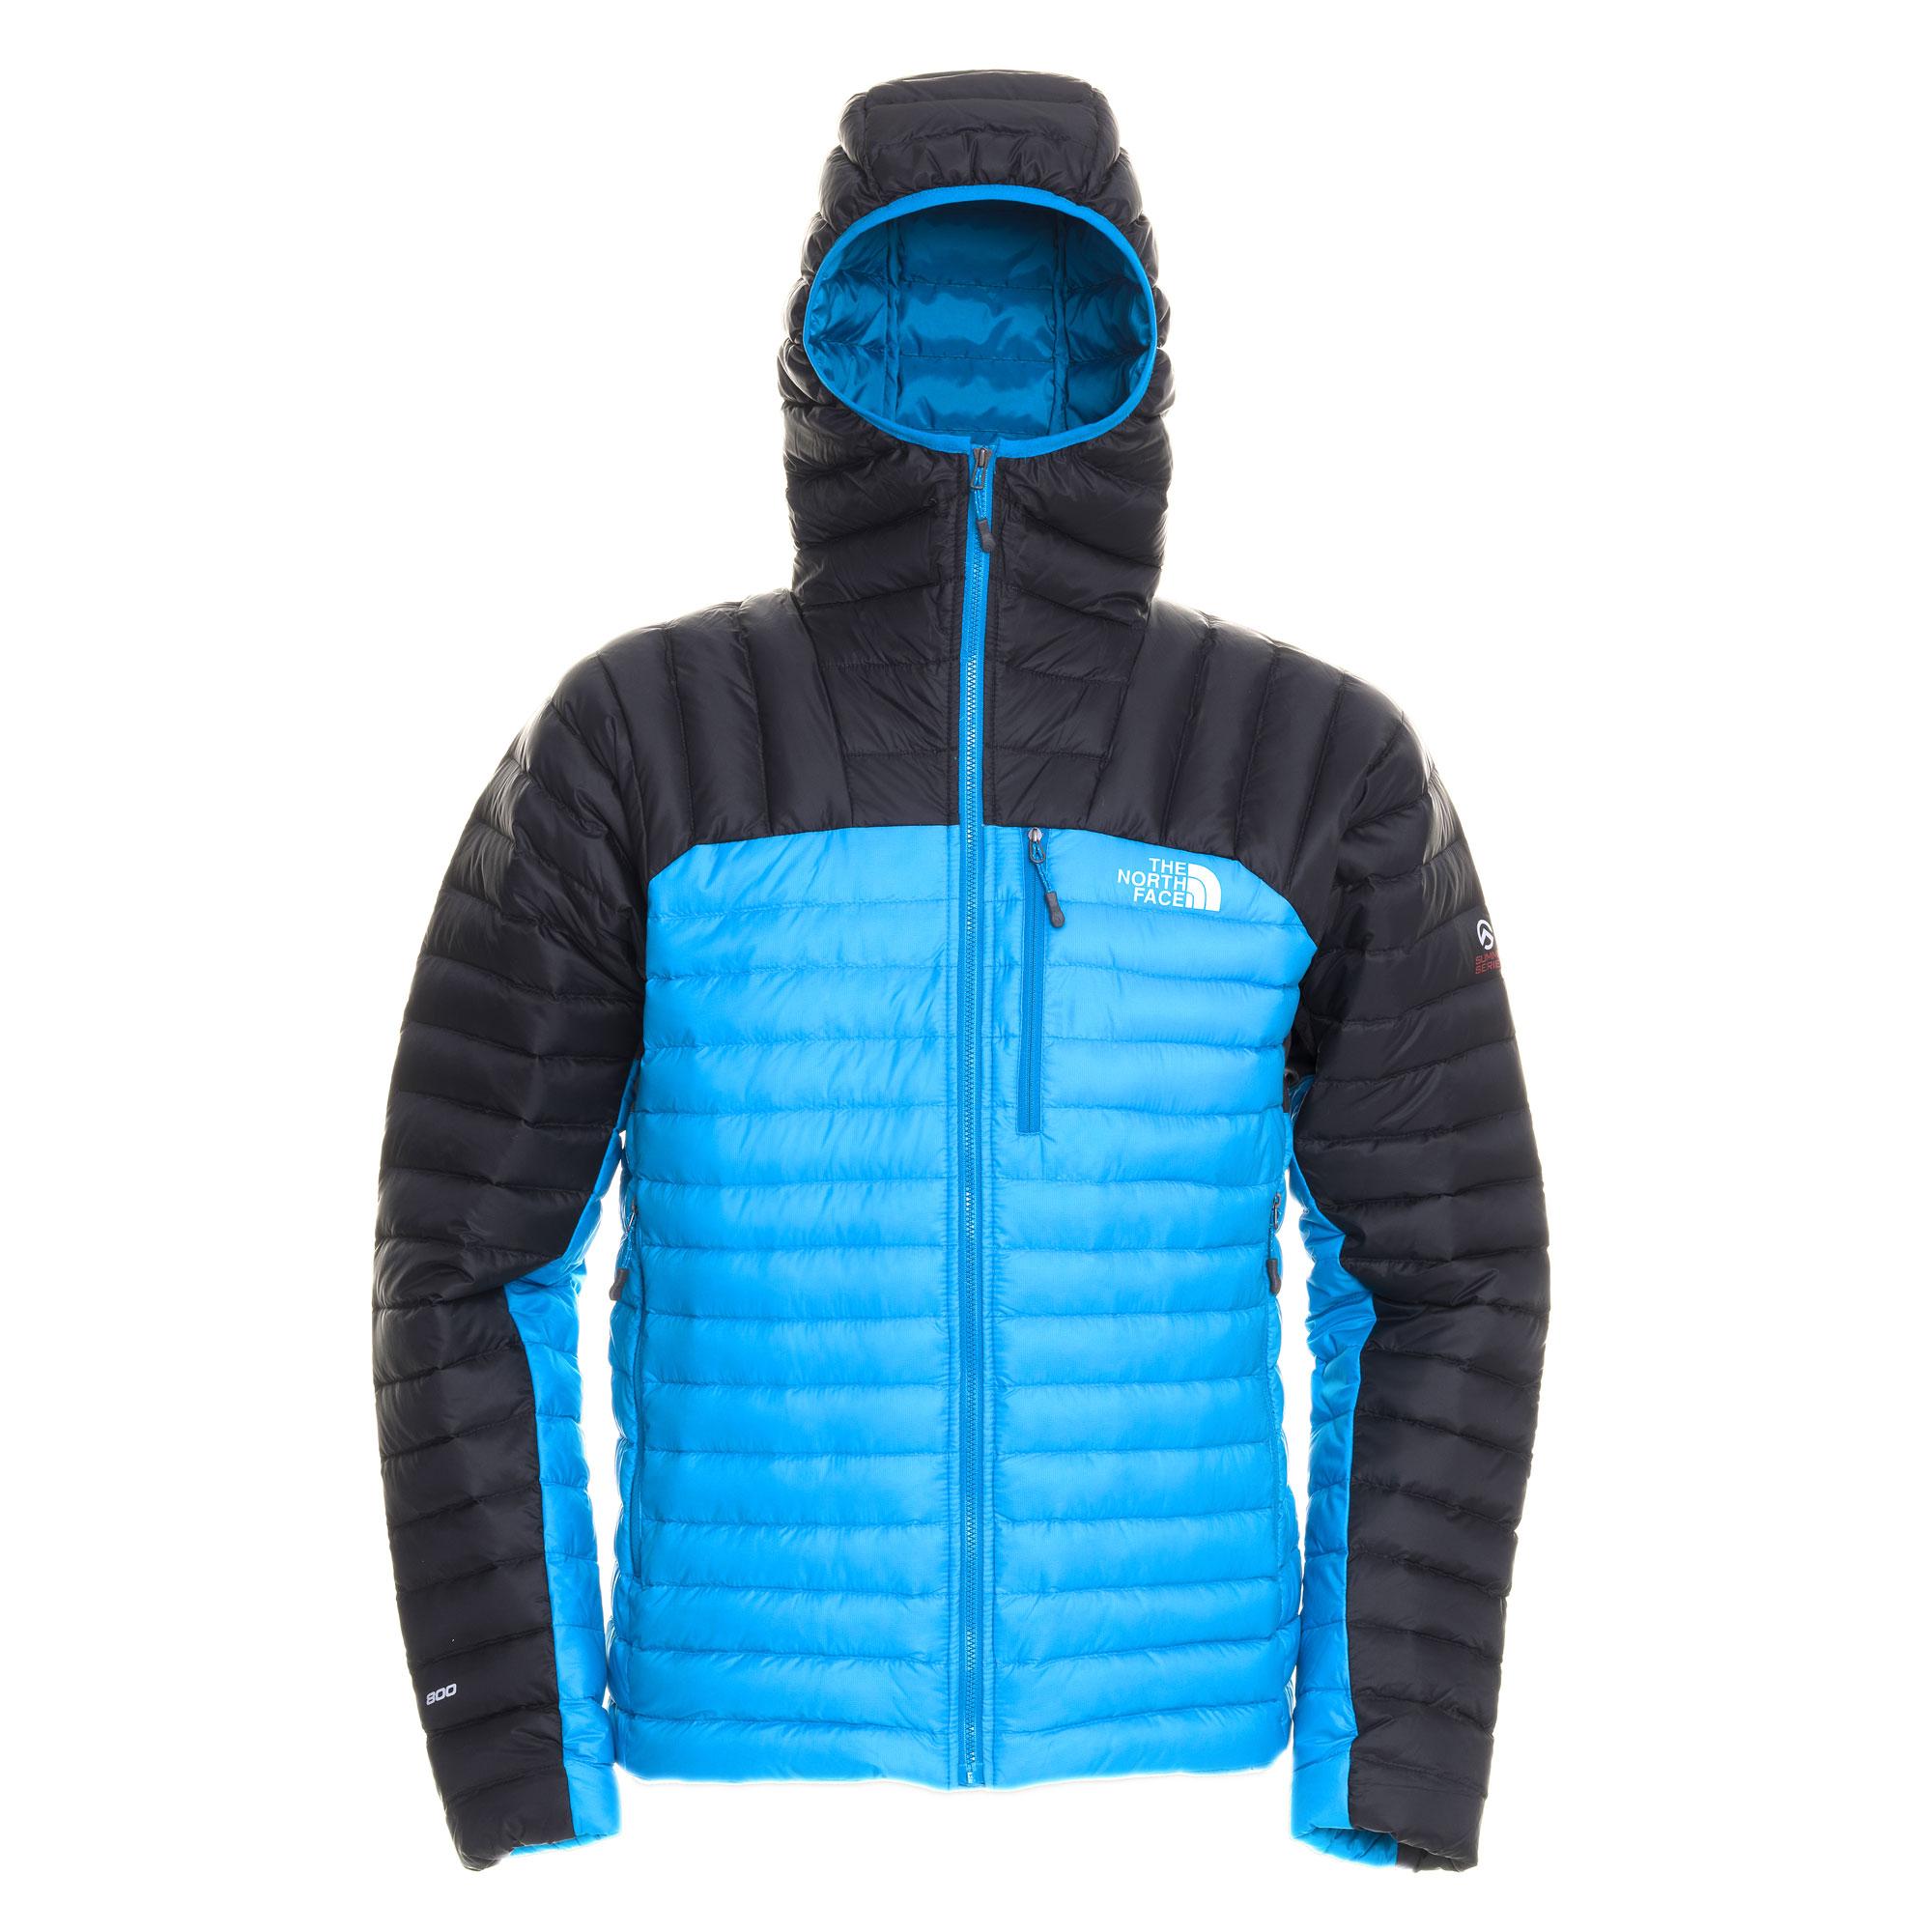 Foto The north face M catalyst micro jacket